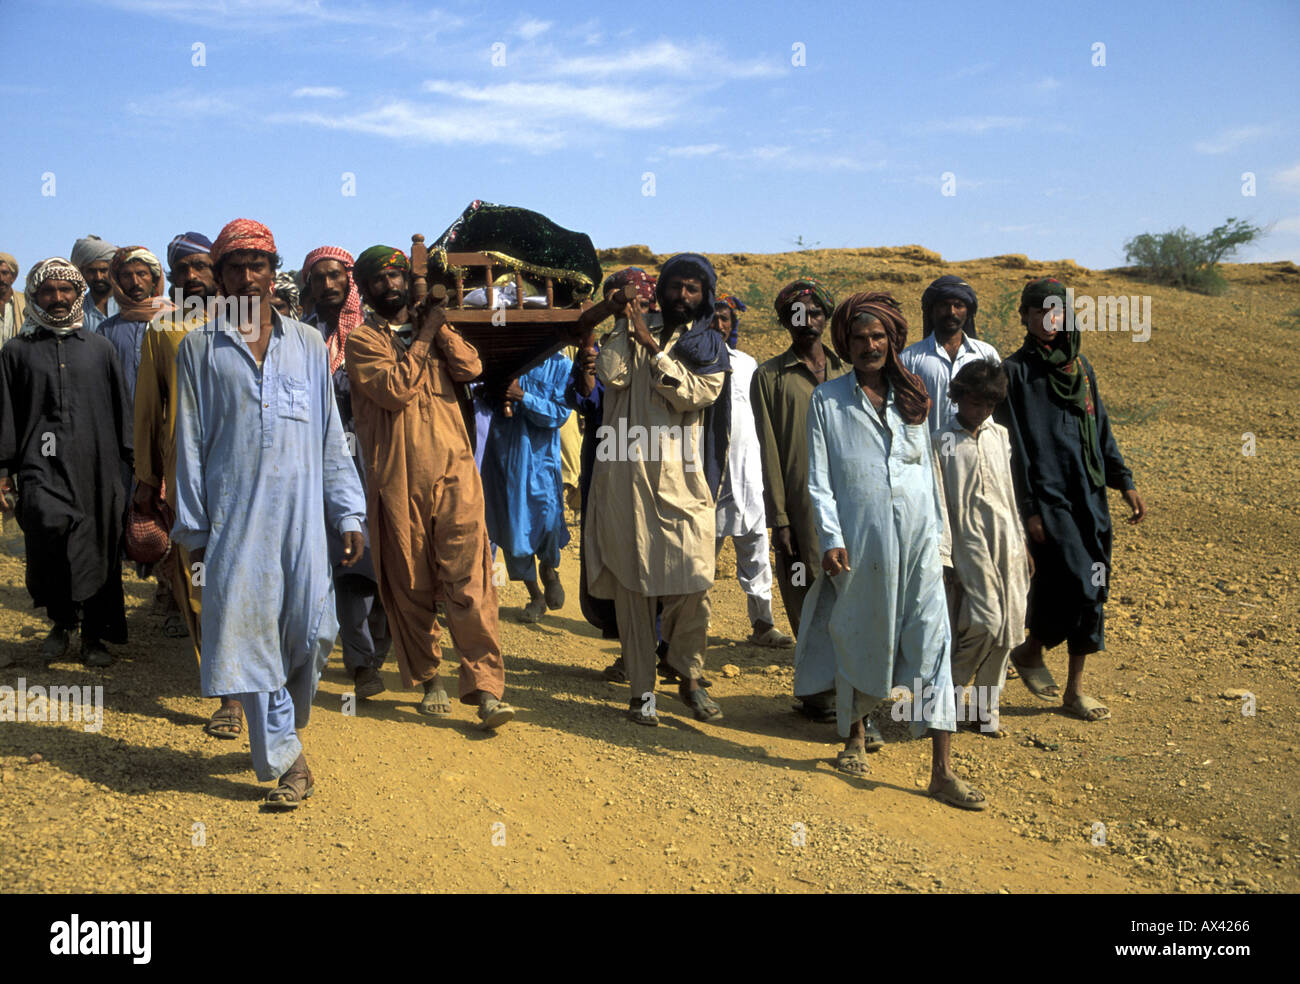 Farmers carrying the funeral bier of a woman in Sindh, Pakistan. She died giving birth. Stock Photo